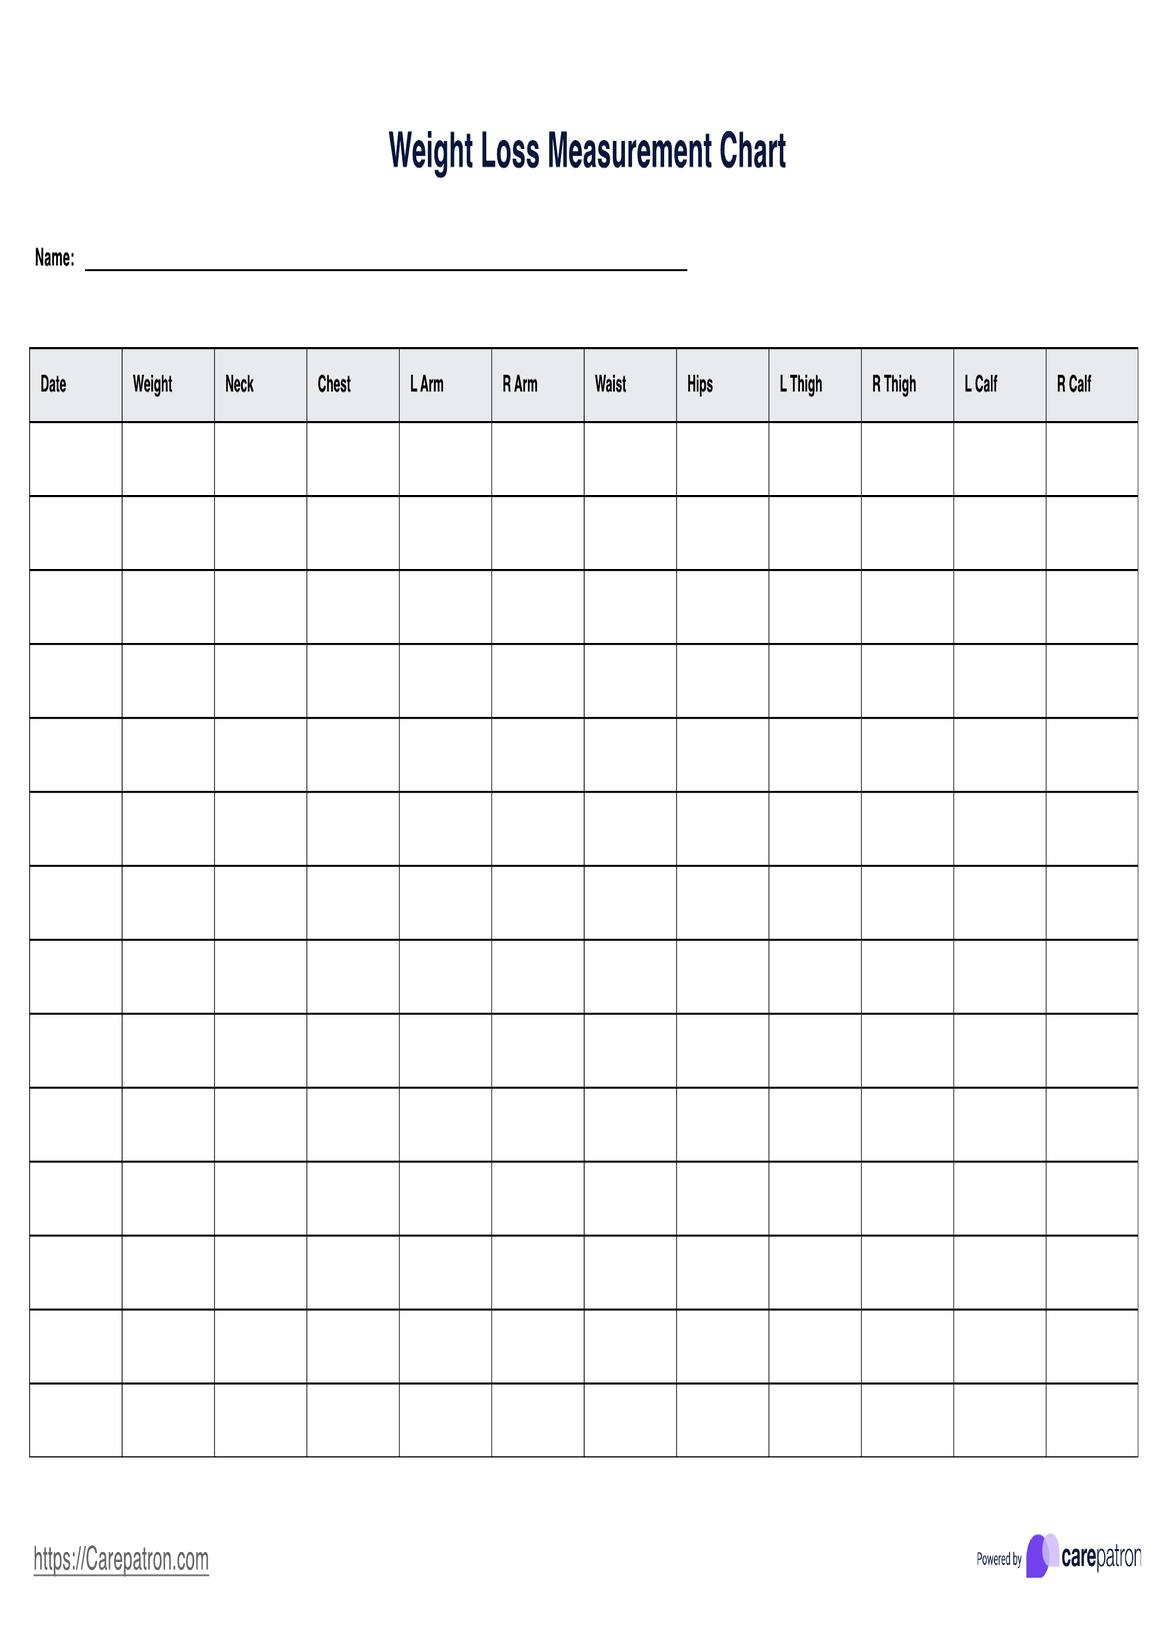 Weight Loss Measurement Chart PDF Example